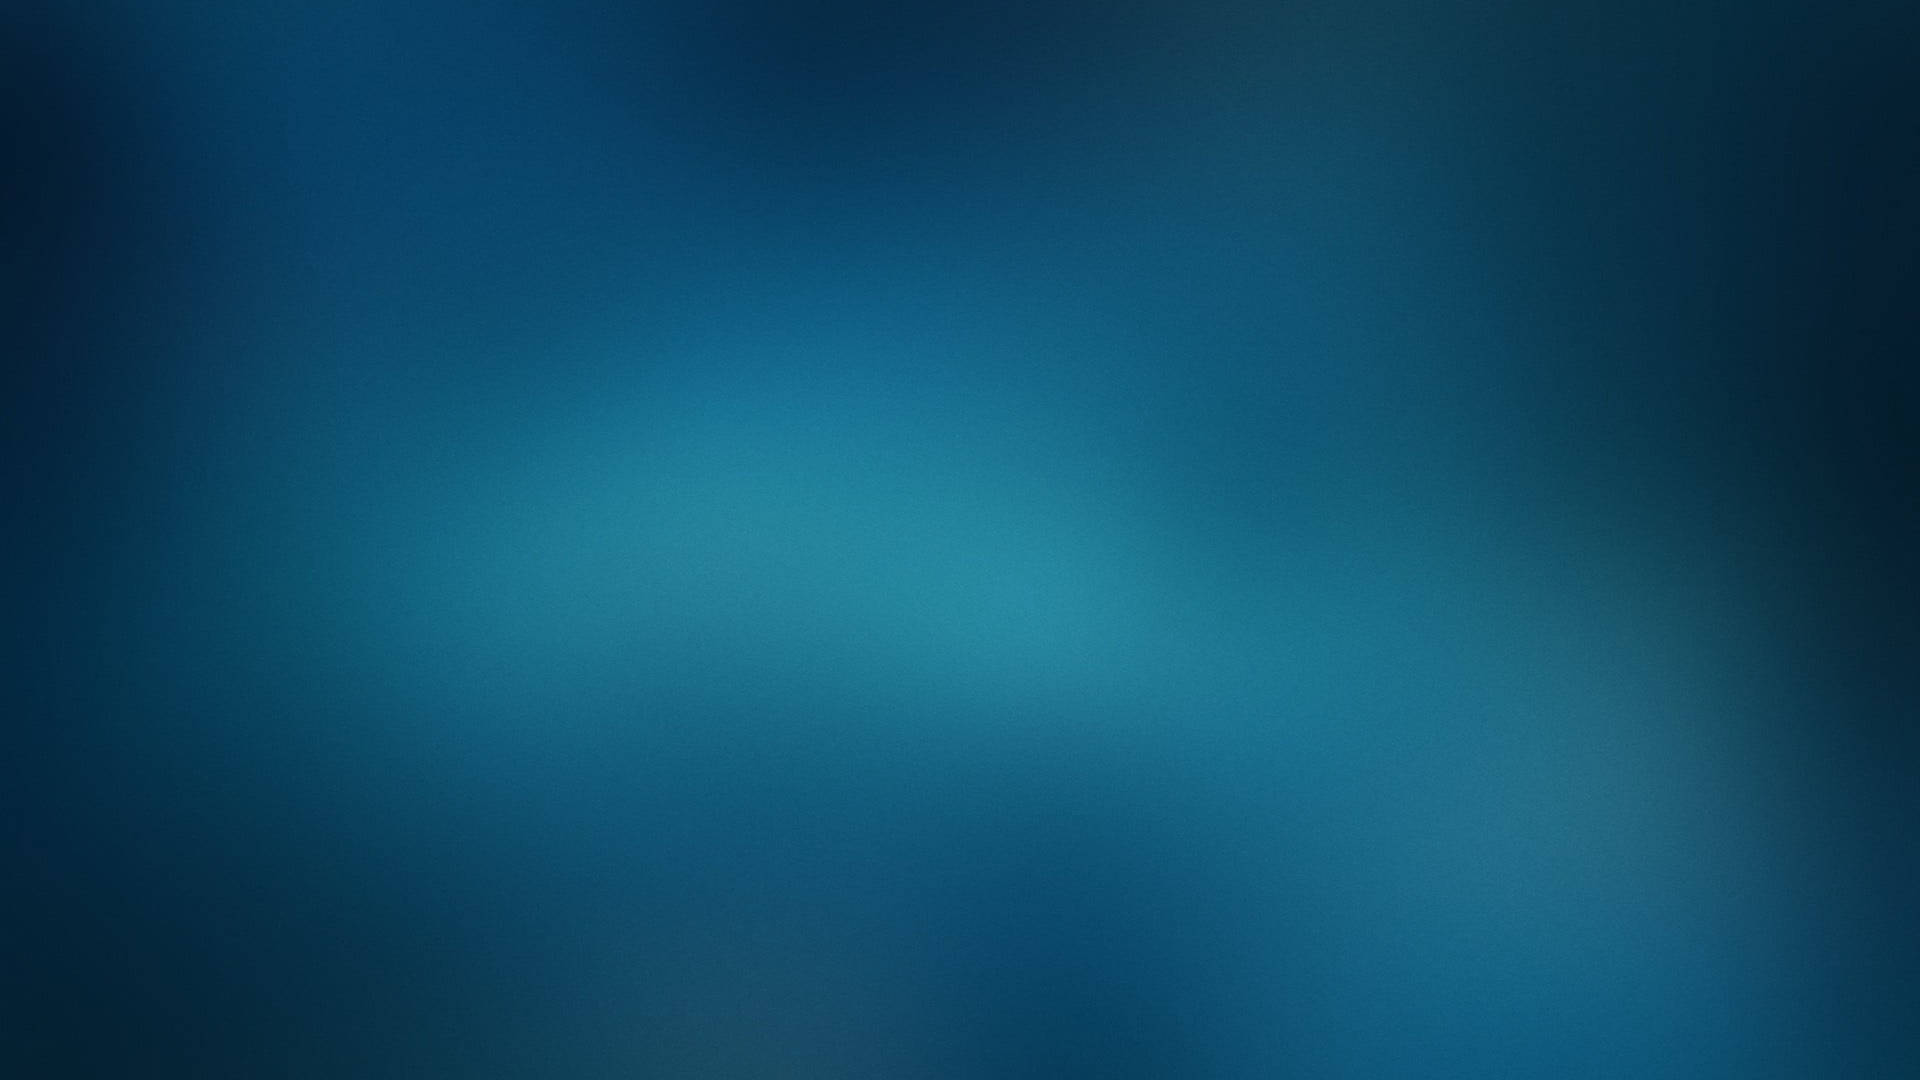 Download Solid Blue Aesthetic Soft Gradient Wallpaper 